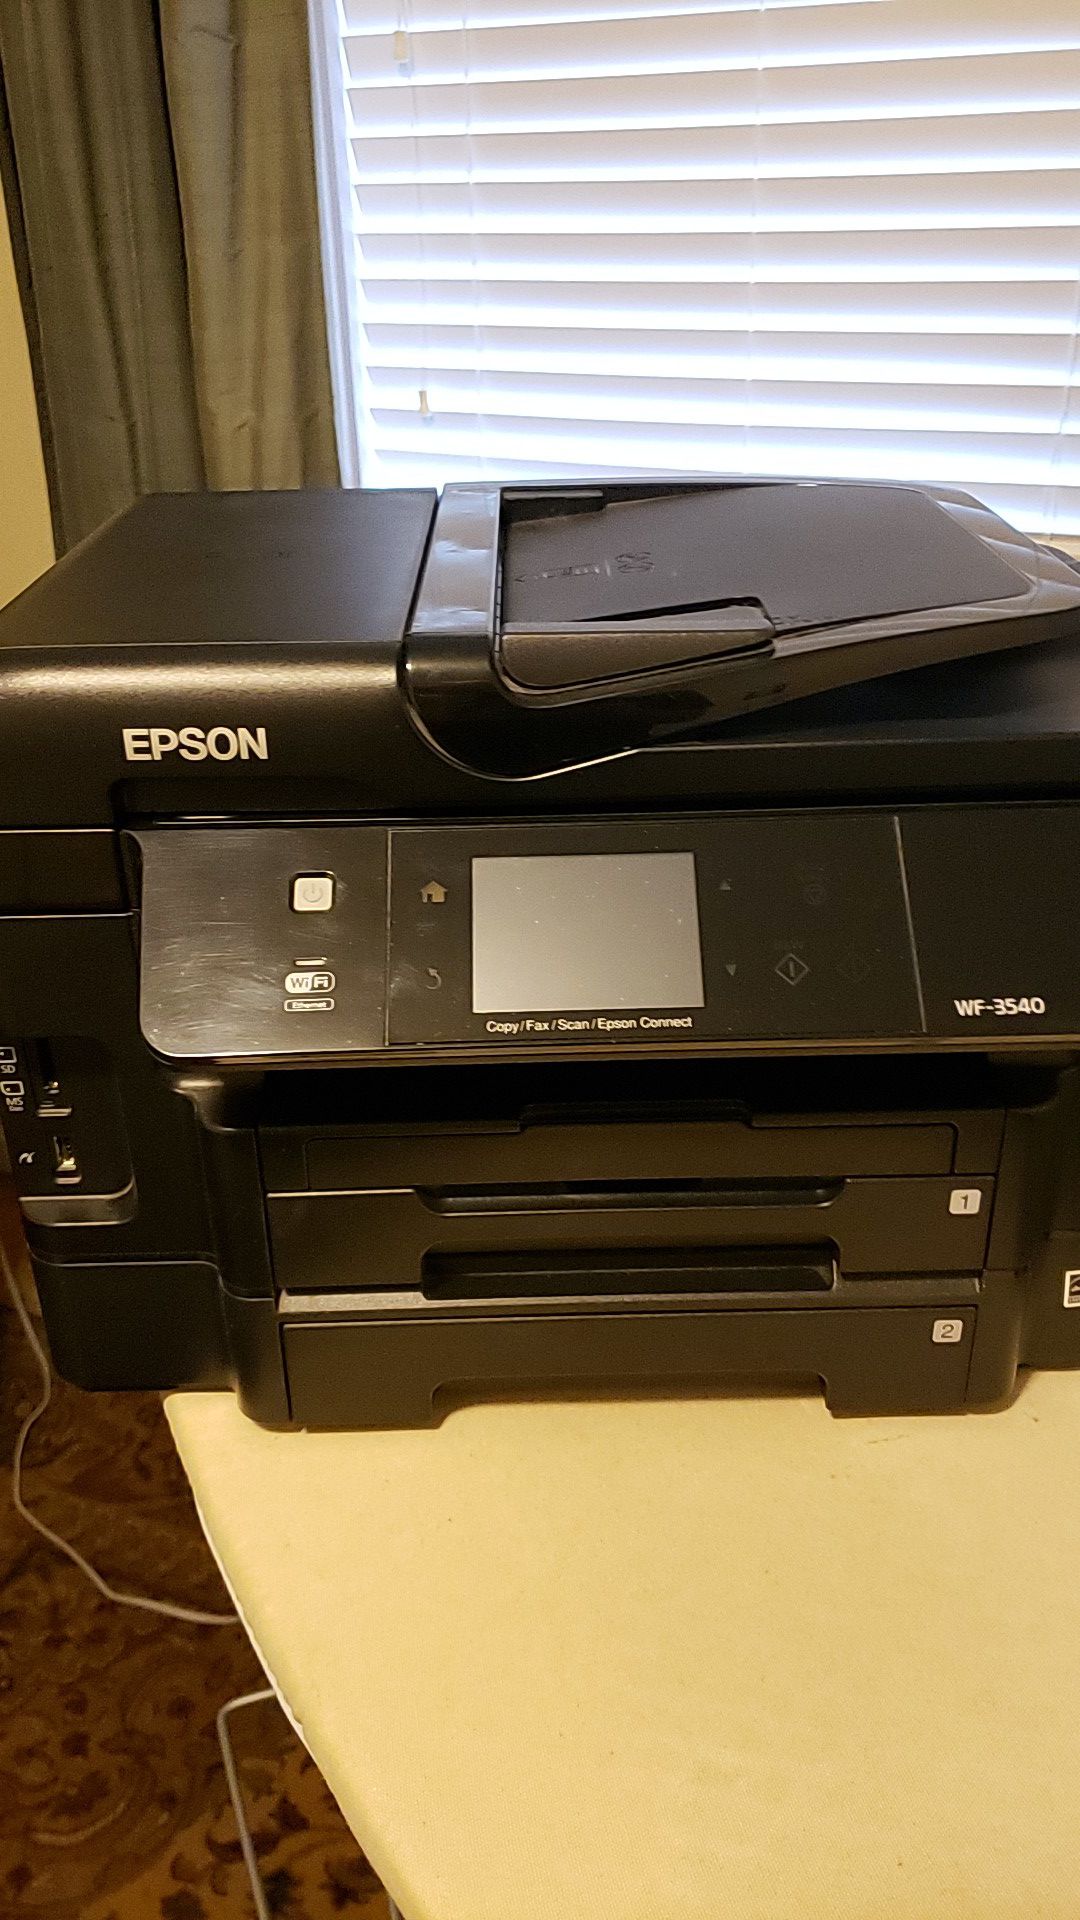 EPSON ALL IN ONE PRINTER WF-3540